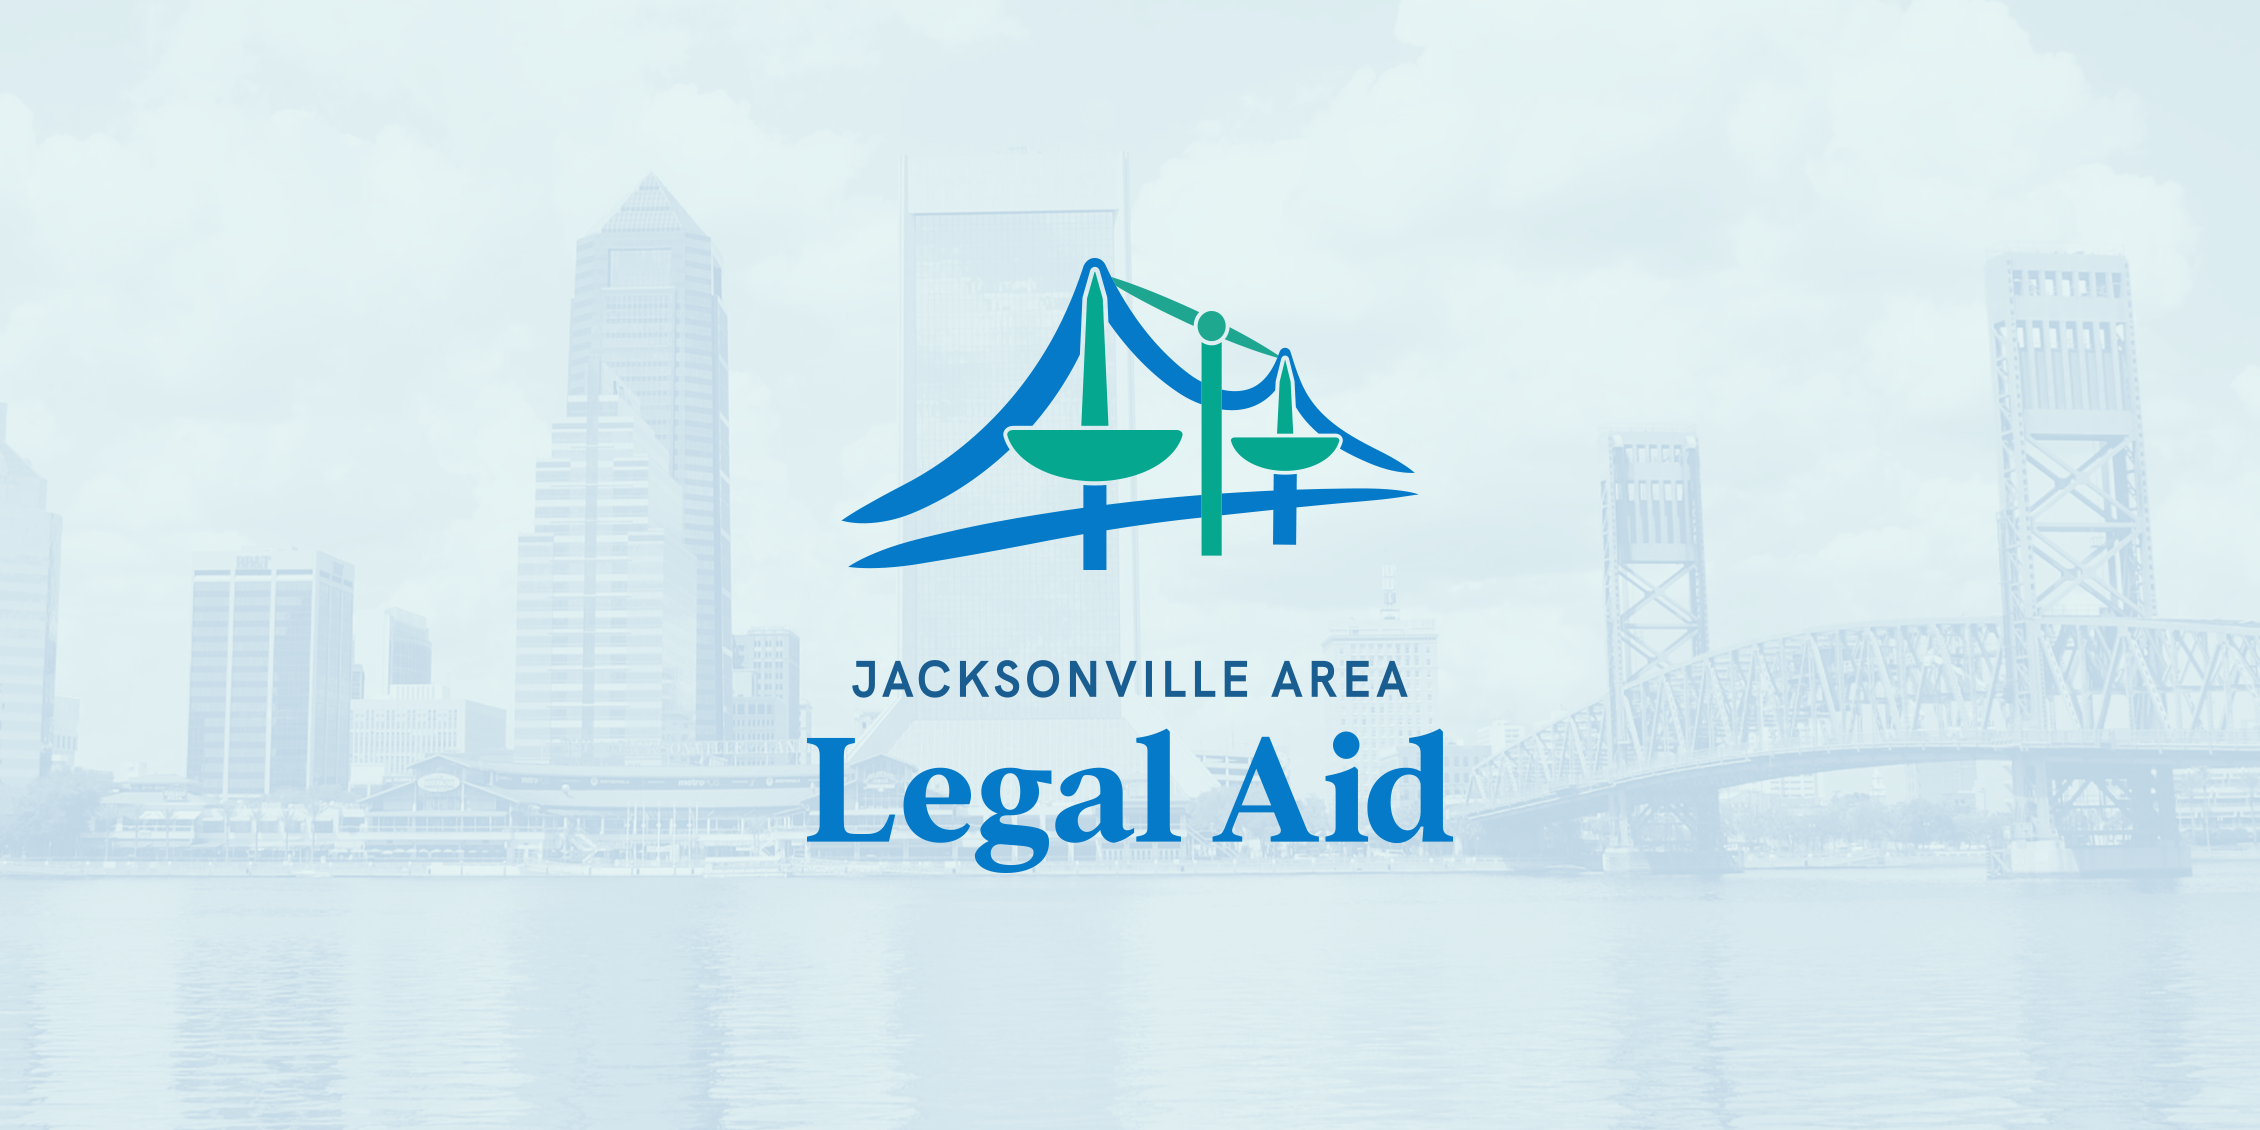 Jacksonville Area Legal Aid logo featuring a stylized bridge with scales of justice incorporated into its supports, set against a faded cityscape background. The organization's name appears below in blue text.